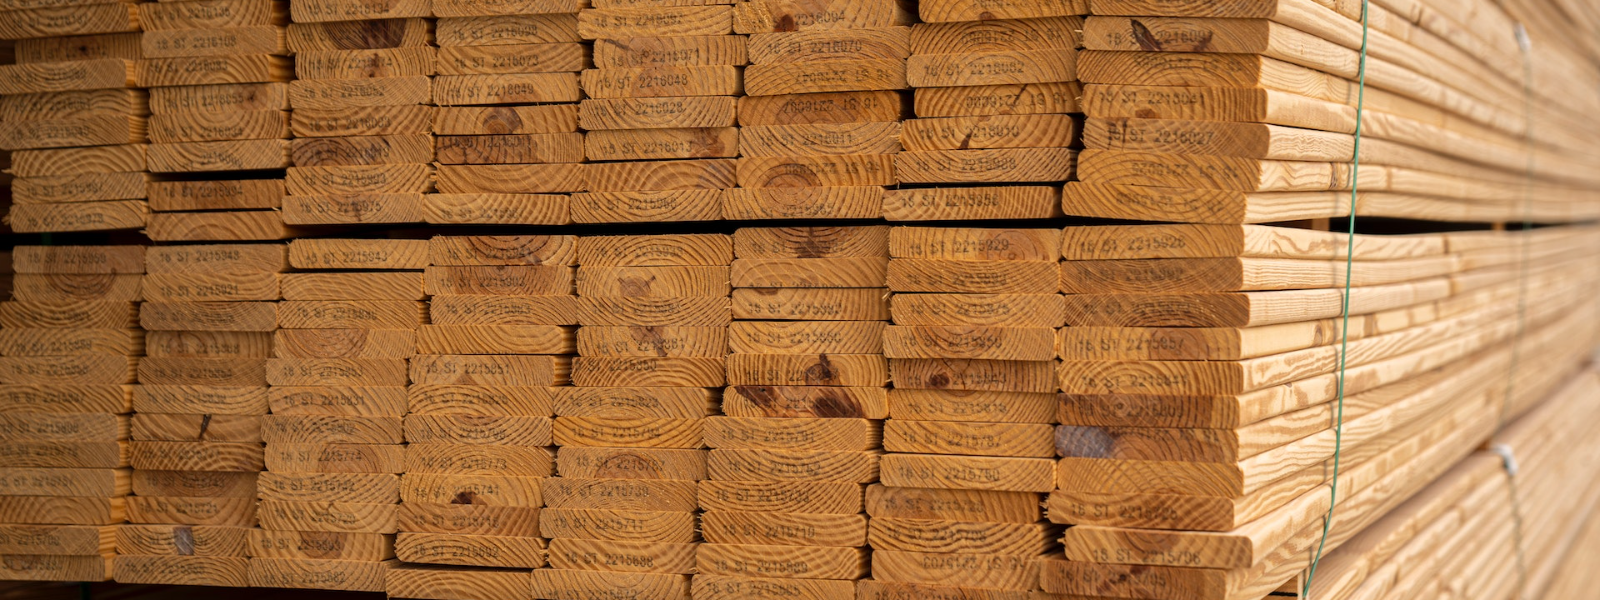 Wholesale of wood and products for the first-stage processing of wood in Kuressaare